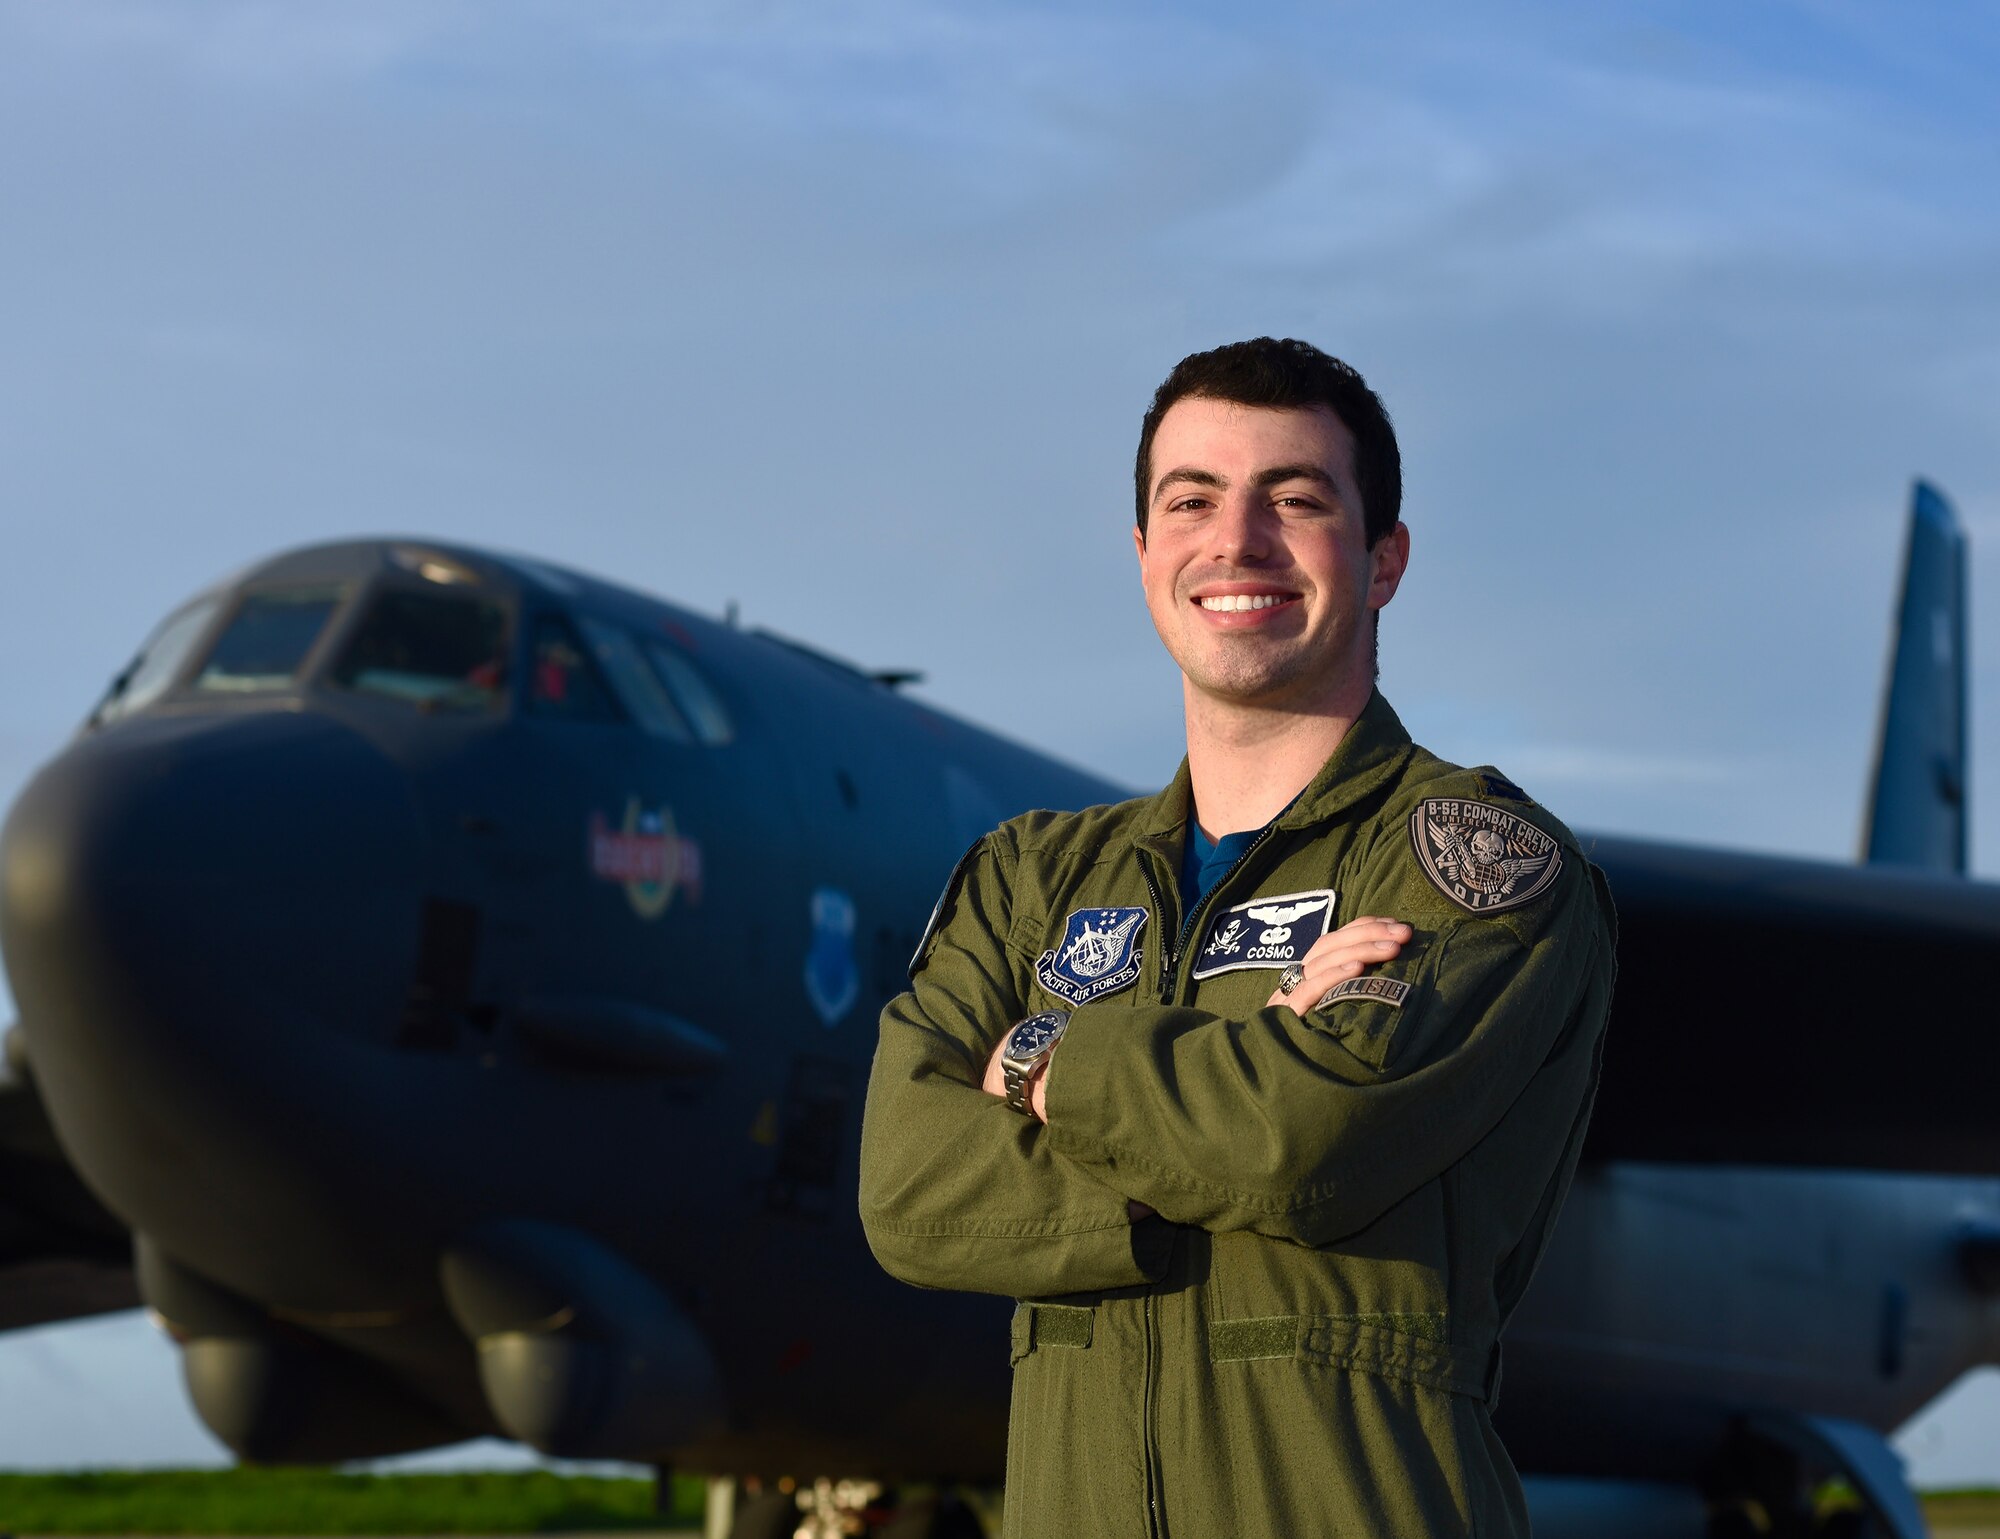 At just 27-years-old, Capt Gluck is being recognized for his community service, his devotion to country, and his commitment to the Language Enabled Airman Program.